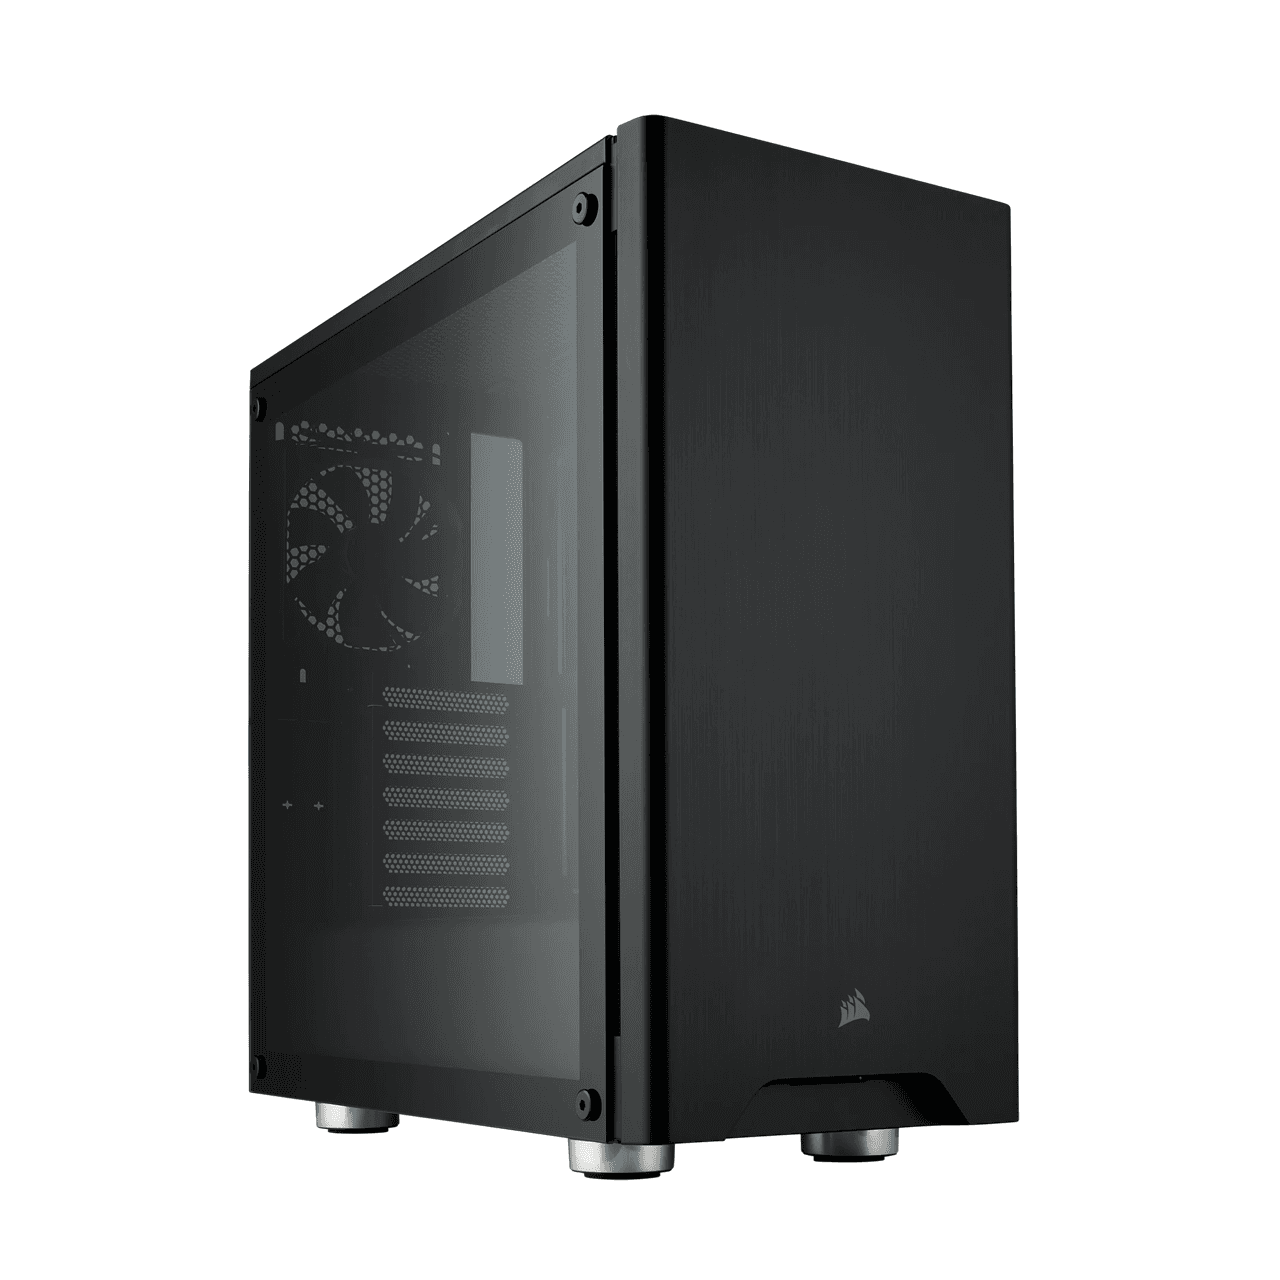 CORSAIR 275R TEMPERED GLASS MID-TOWER GAMING CASE